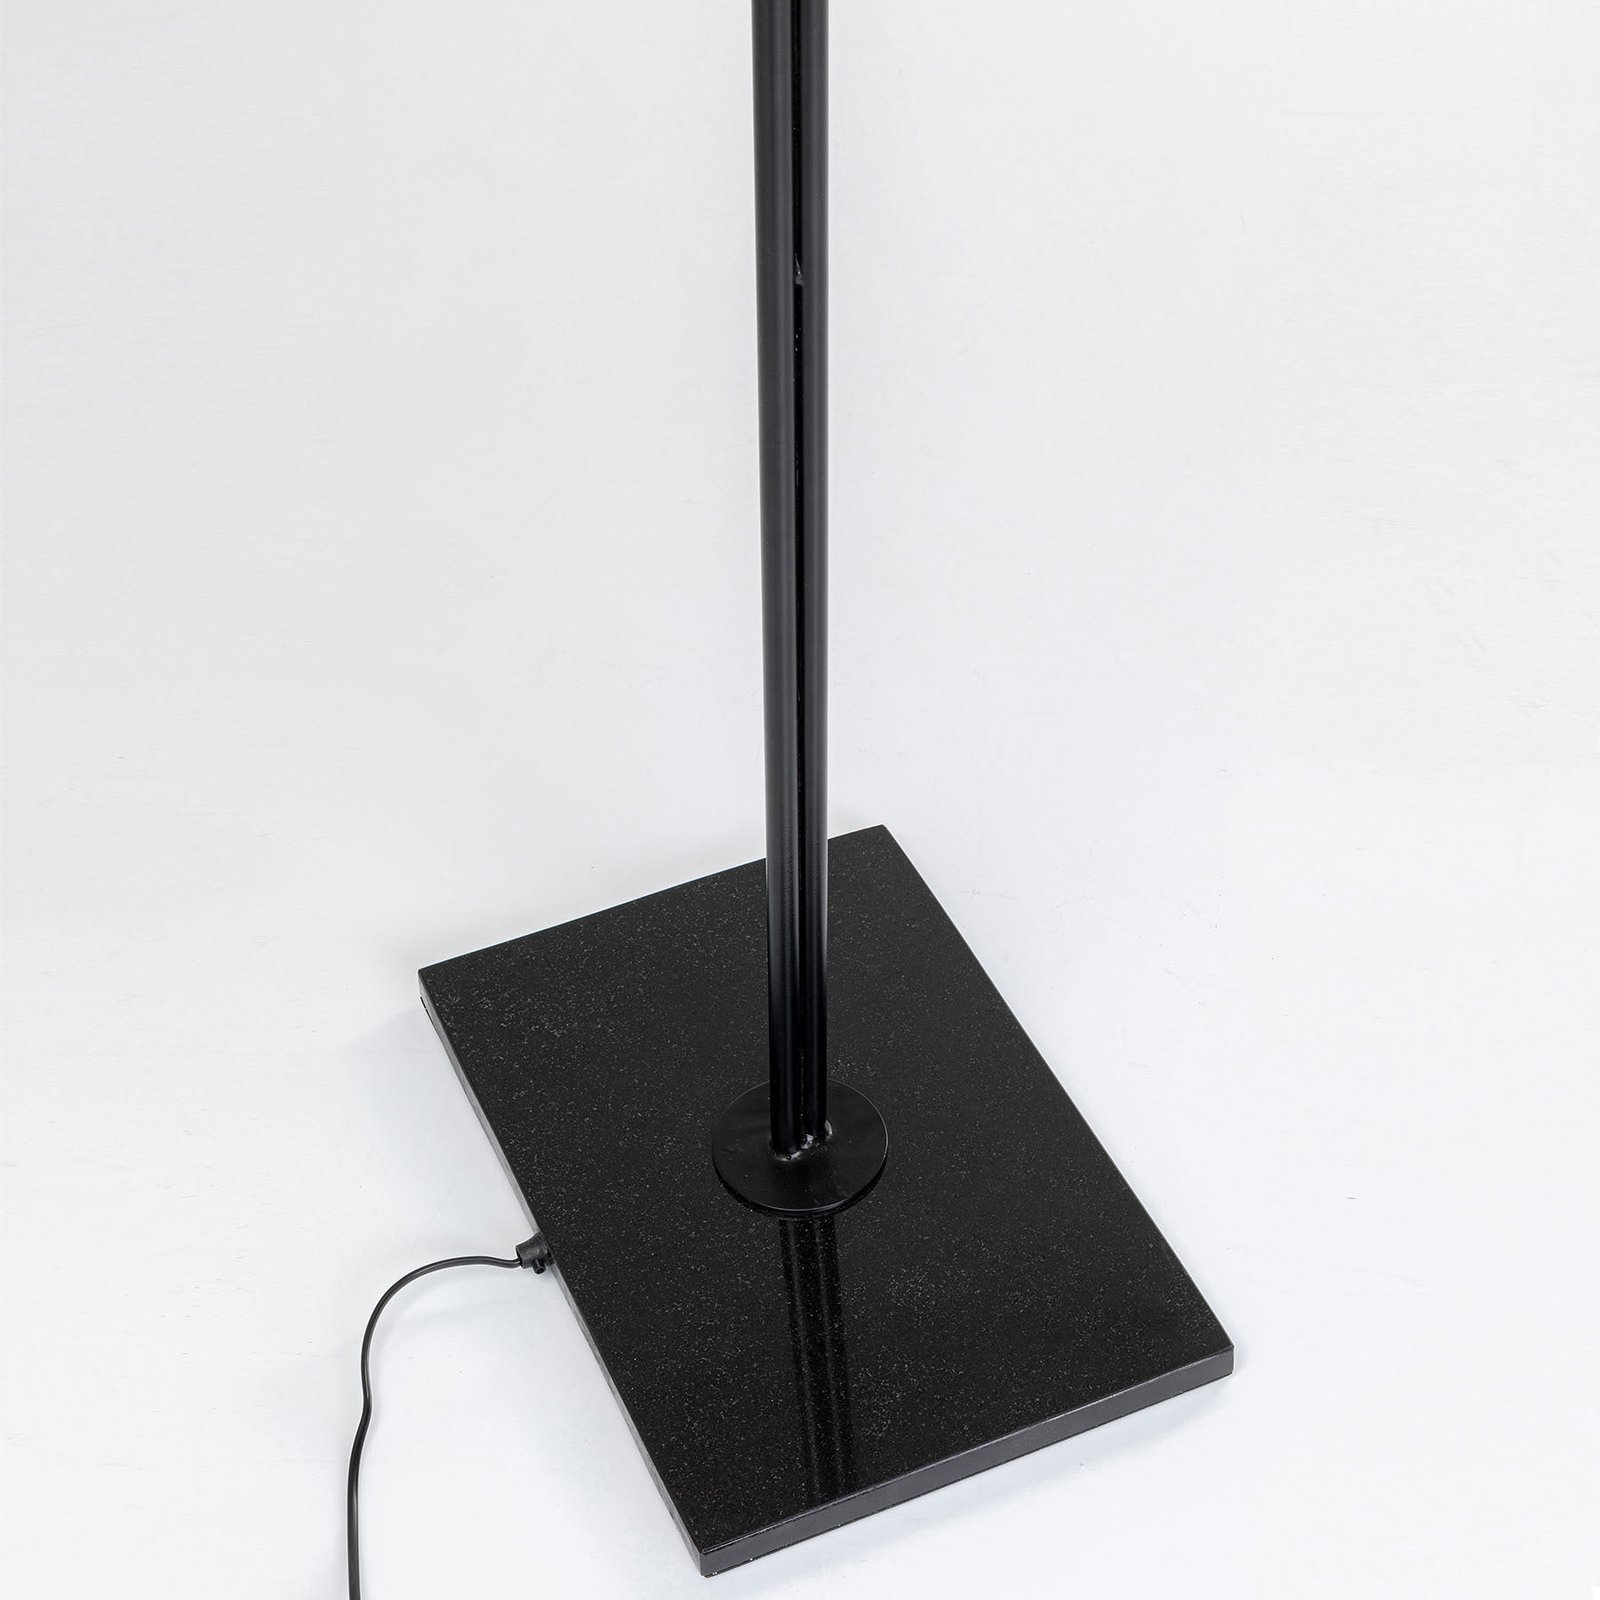 KARE Gingko Due floor lamp with golden leaves